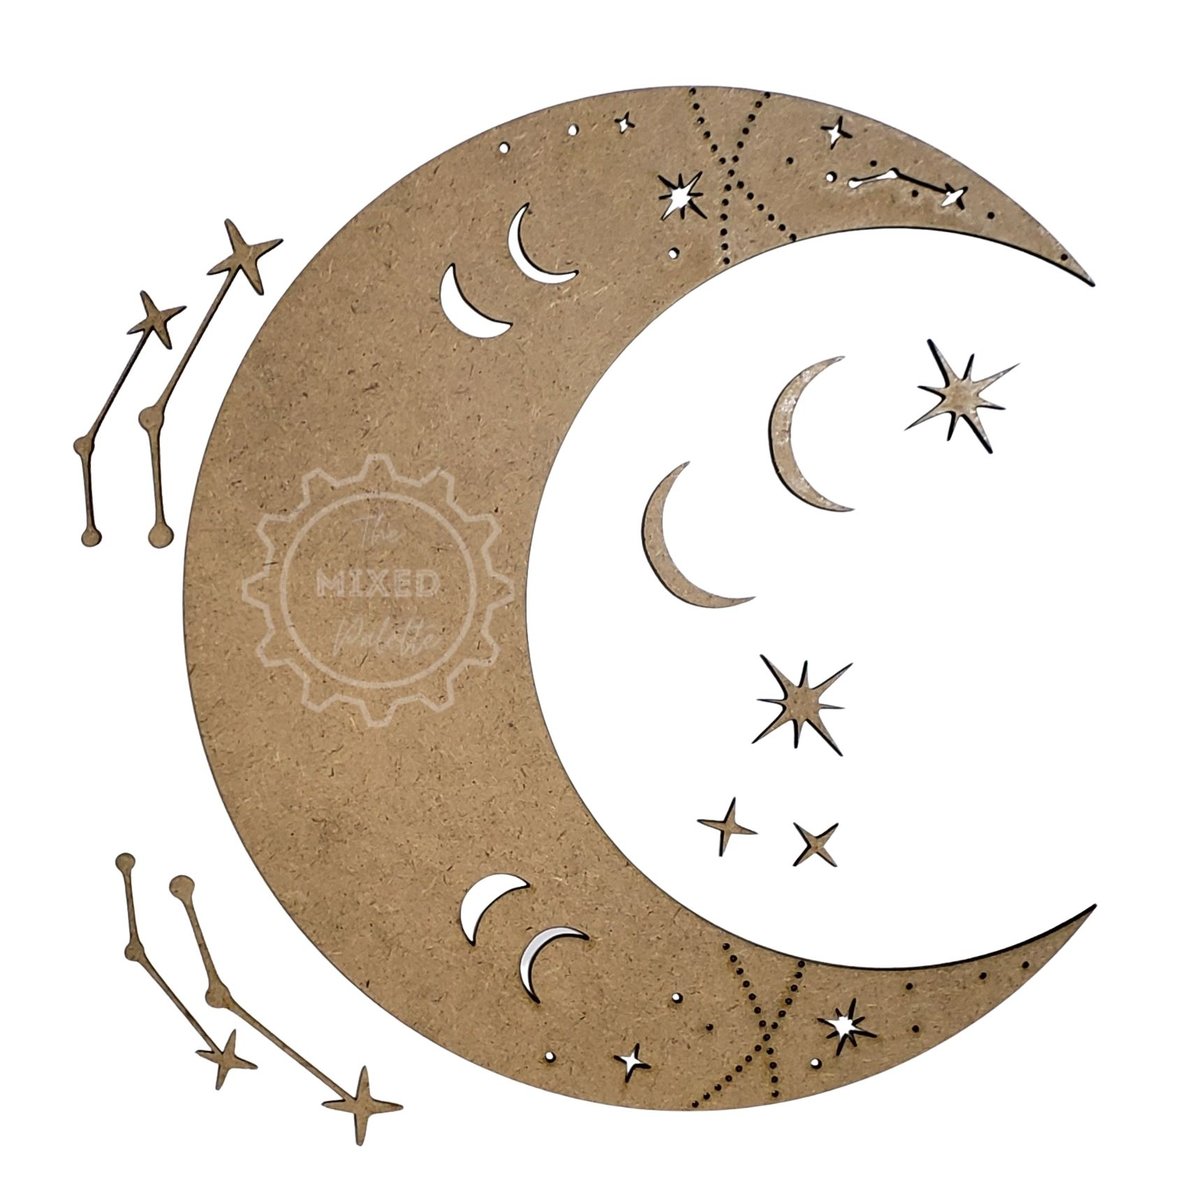 Celestial Shape EPS Polystyrene Moon in Two Sizes, Set of Two